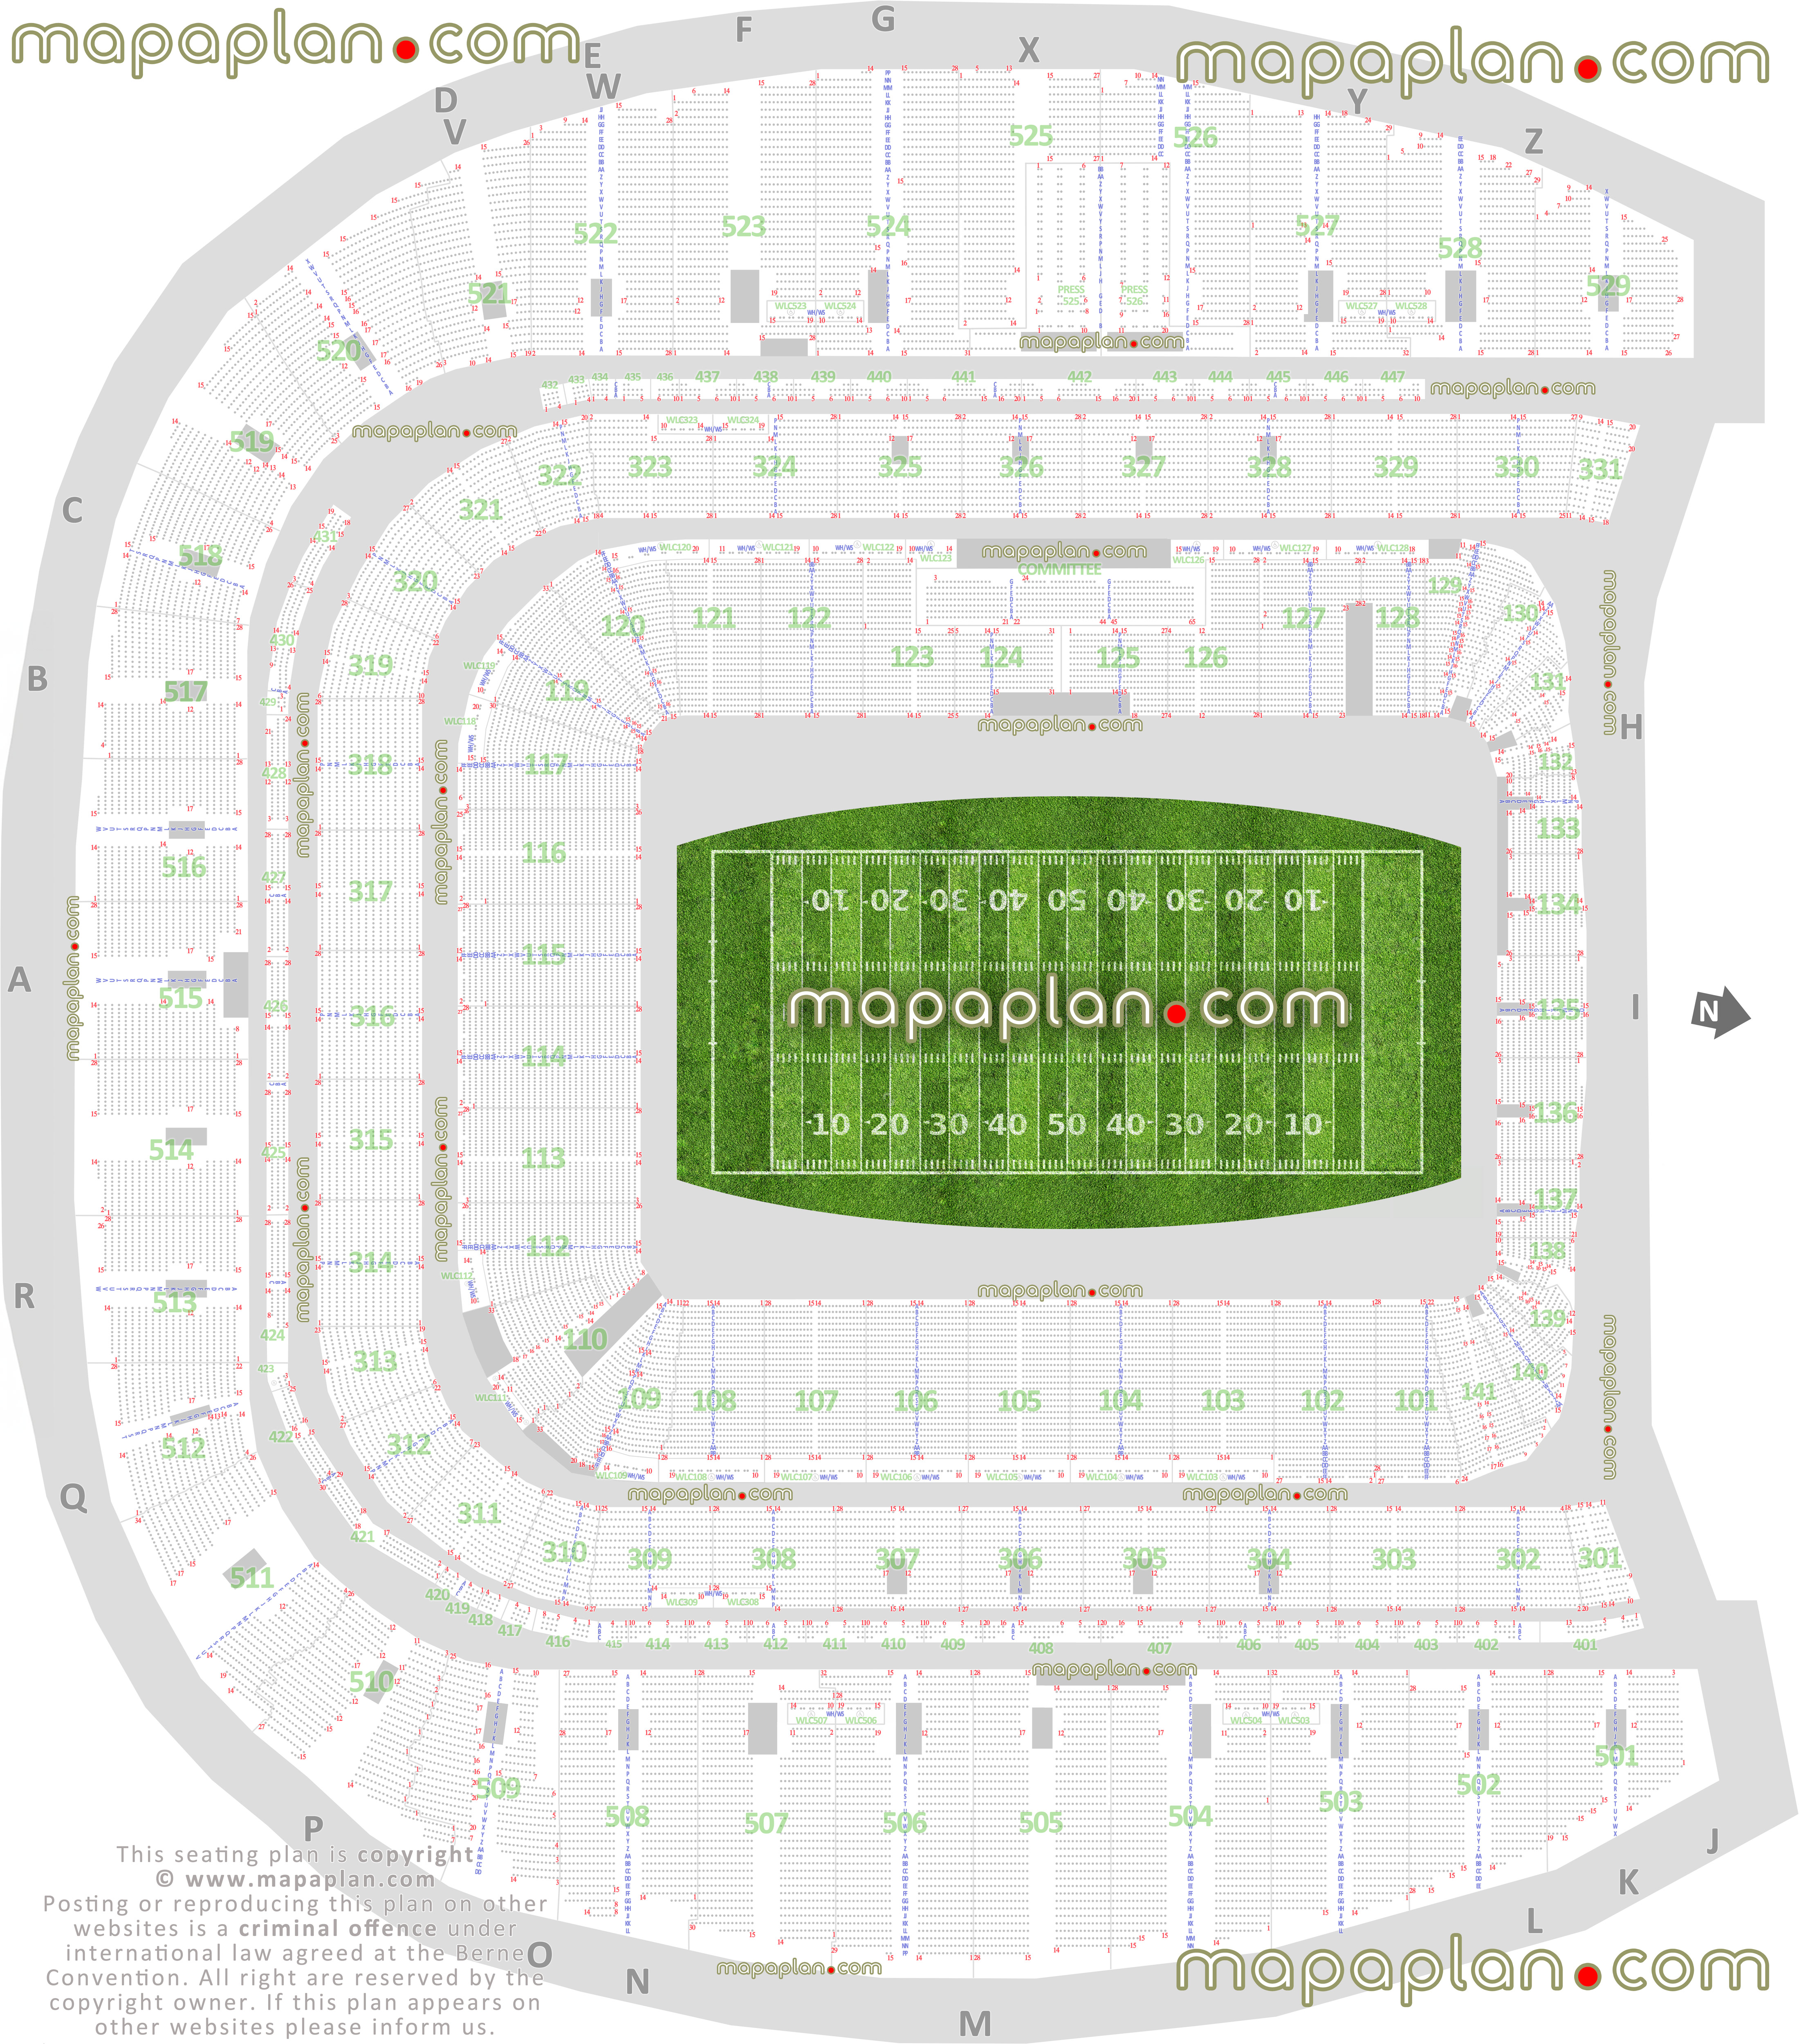 Dublin Aviva Stadium seating plan american college football arena interactive seating checker plan seat numbers per row committee press sections entrances arrangement ticket prices sections review diagram